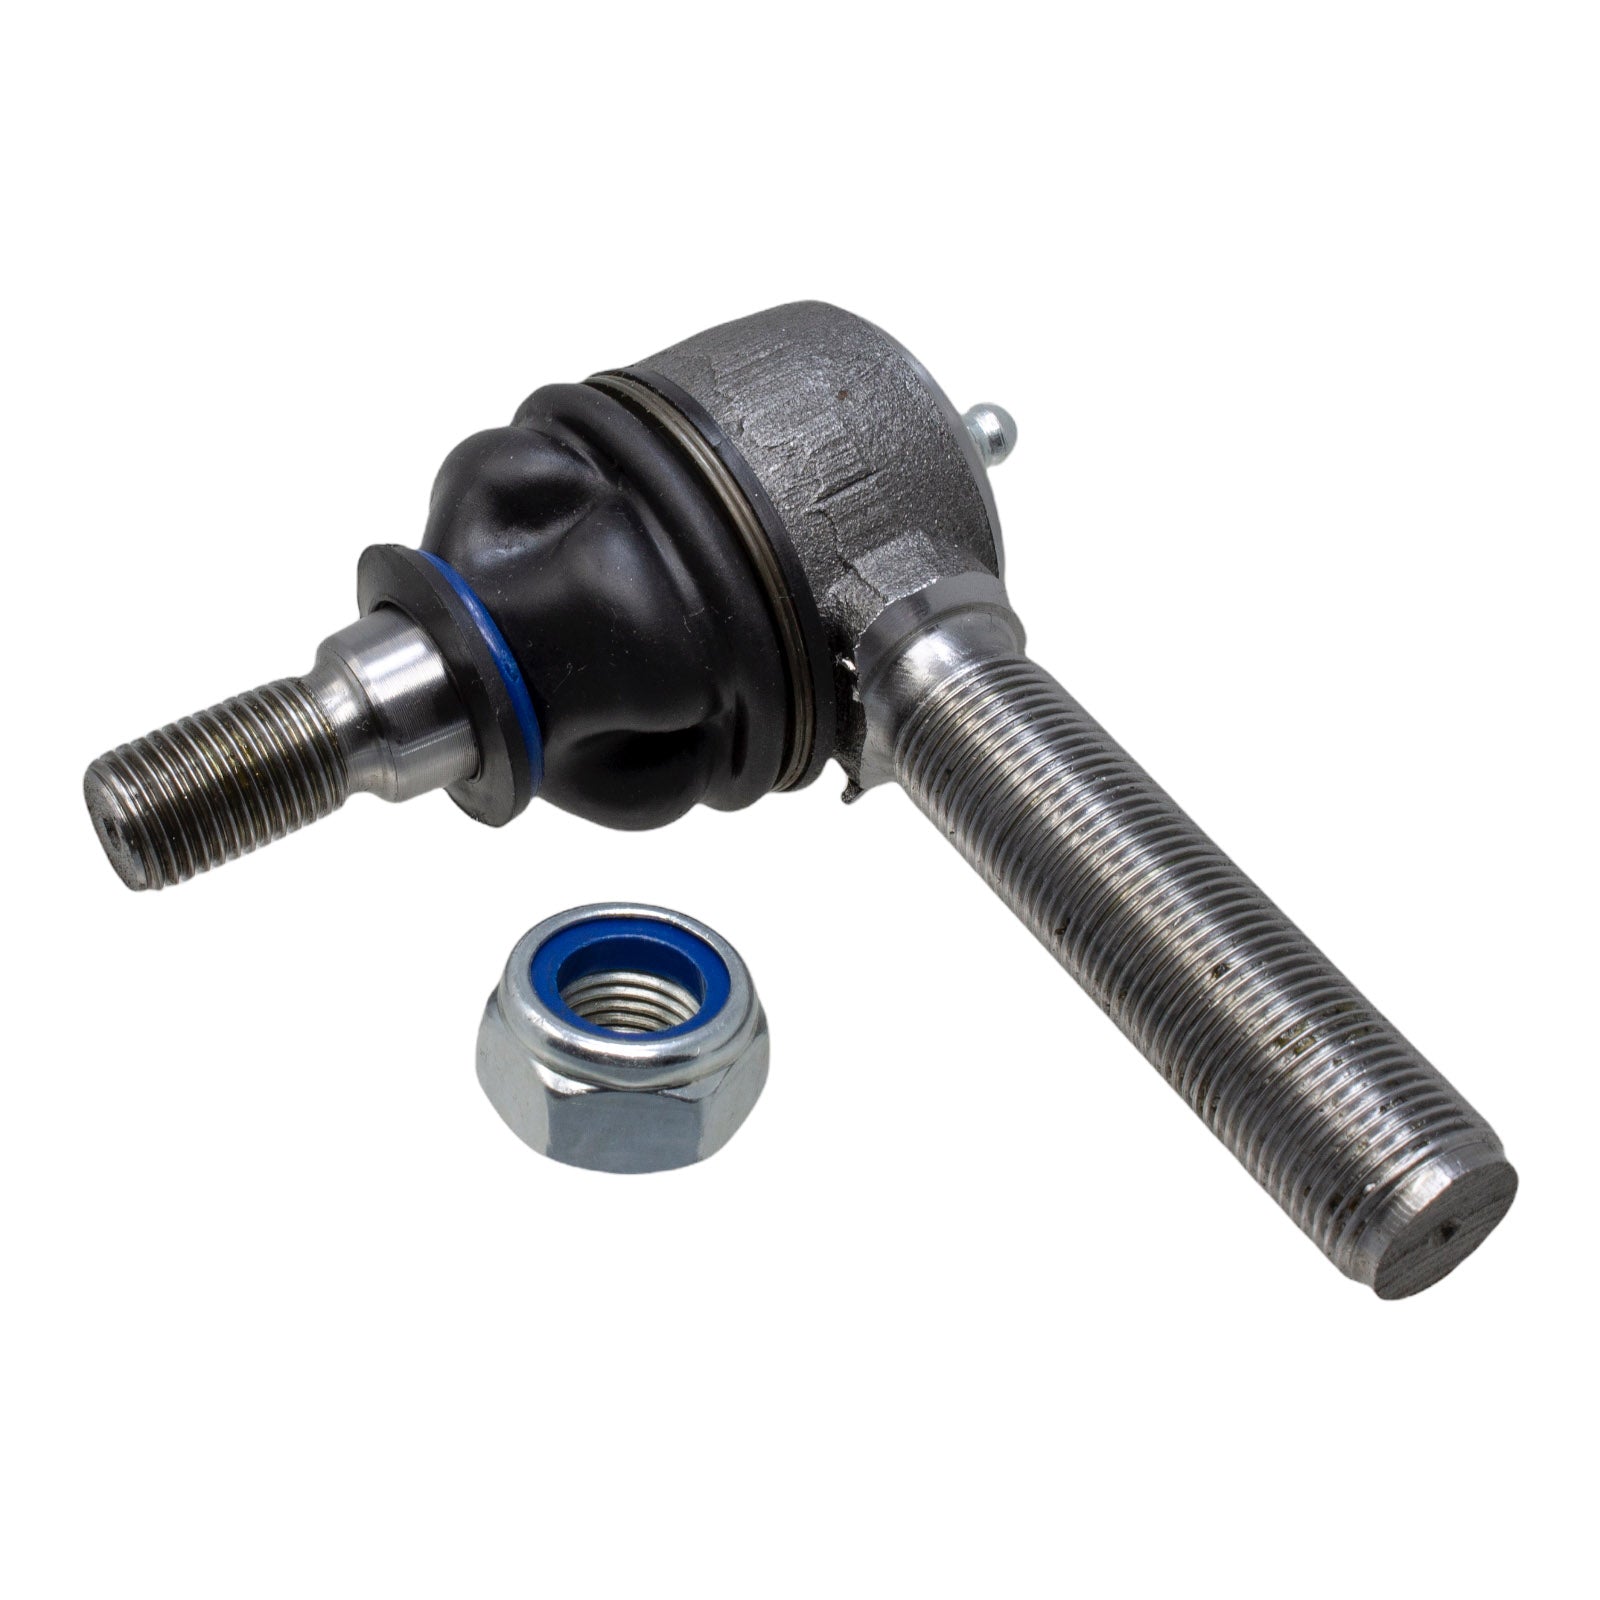 G45368, Tie Rod End Right Hand For Case | Duraforce Inc